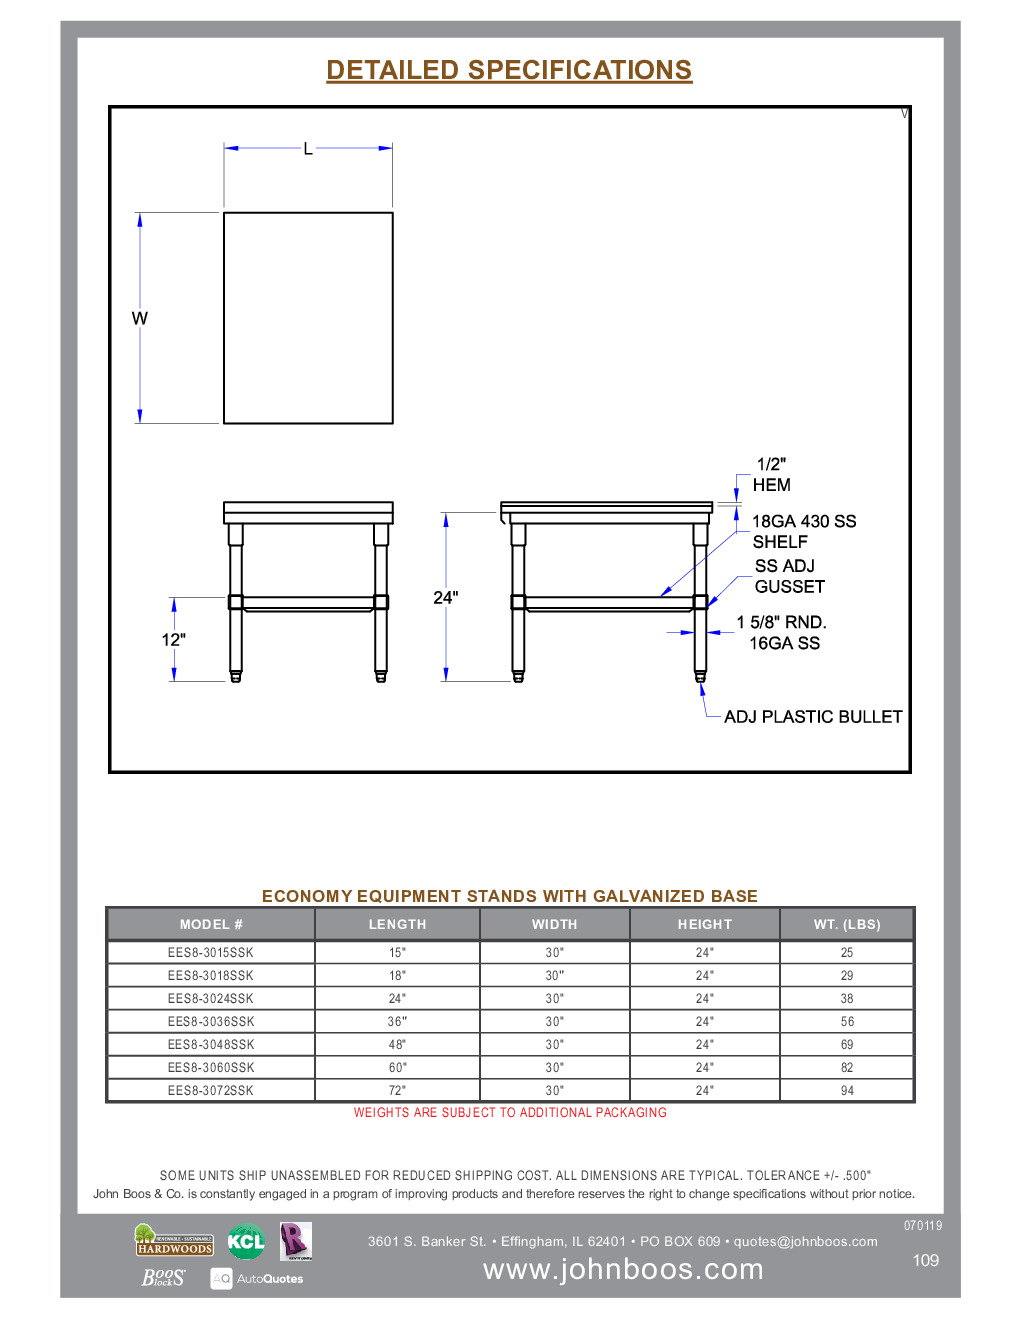 John Boos EES8-3024SSK for Countertop Cooking Equipment Stand